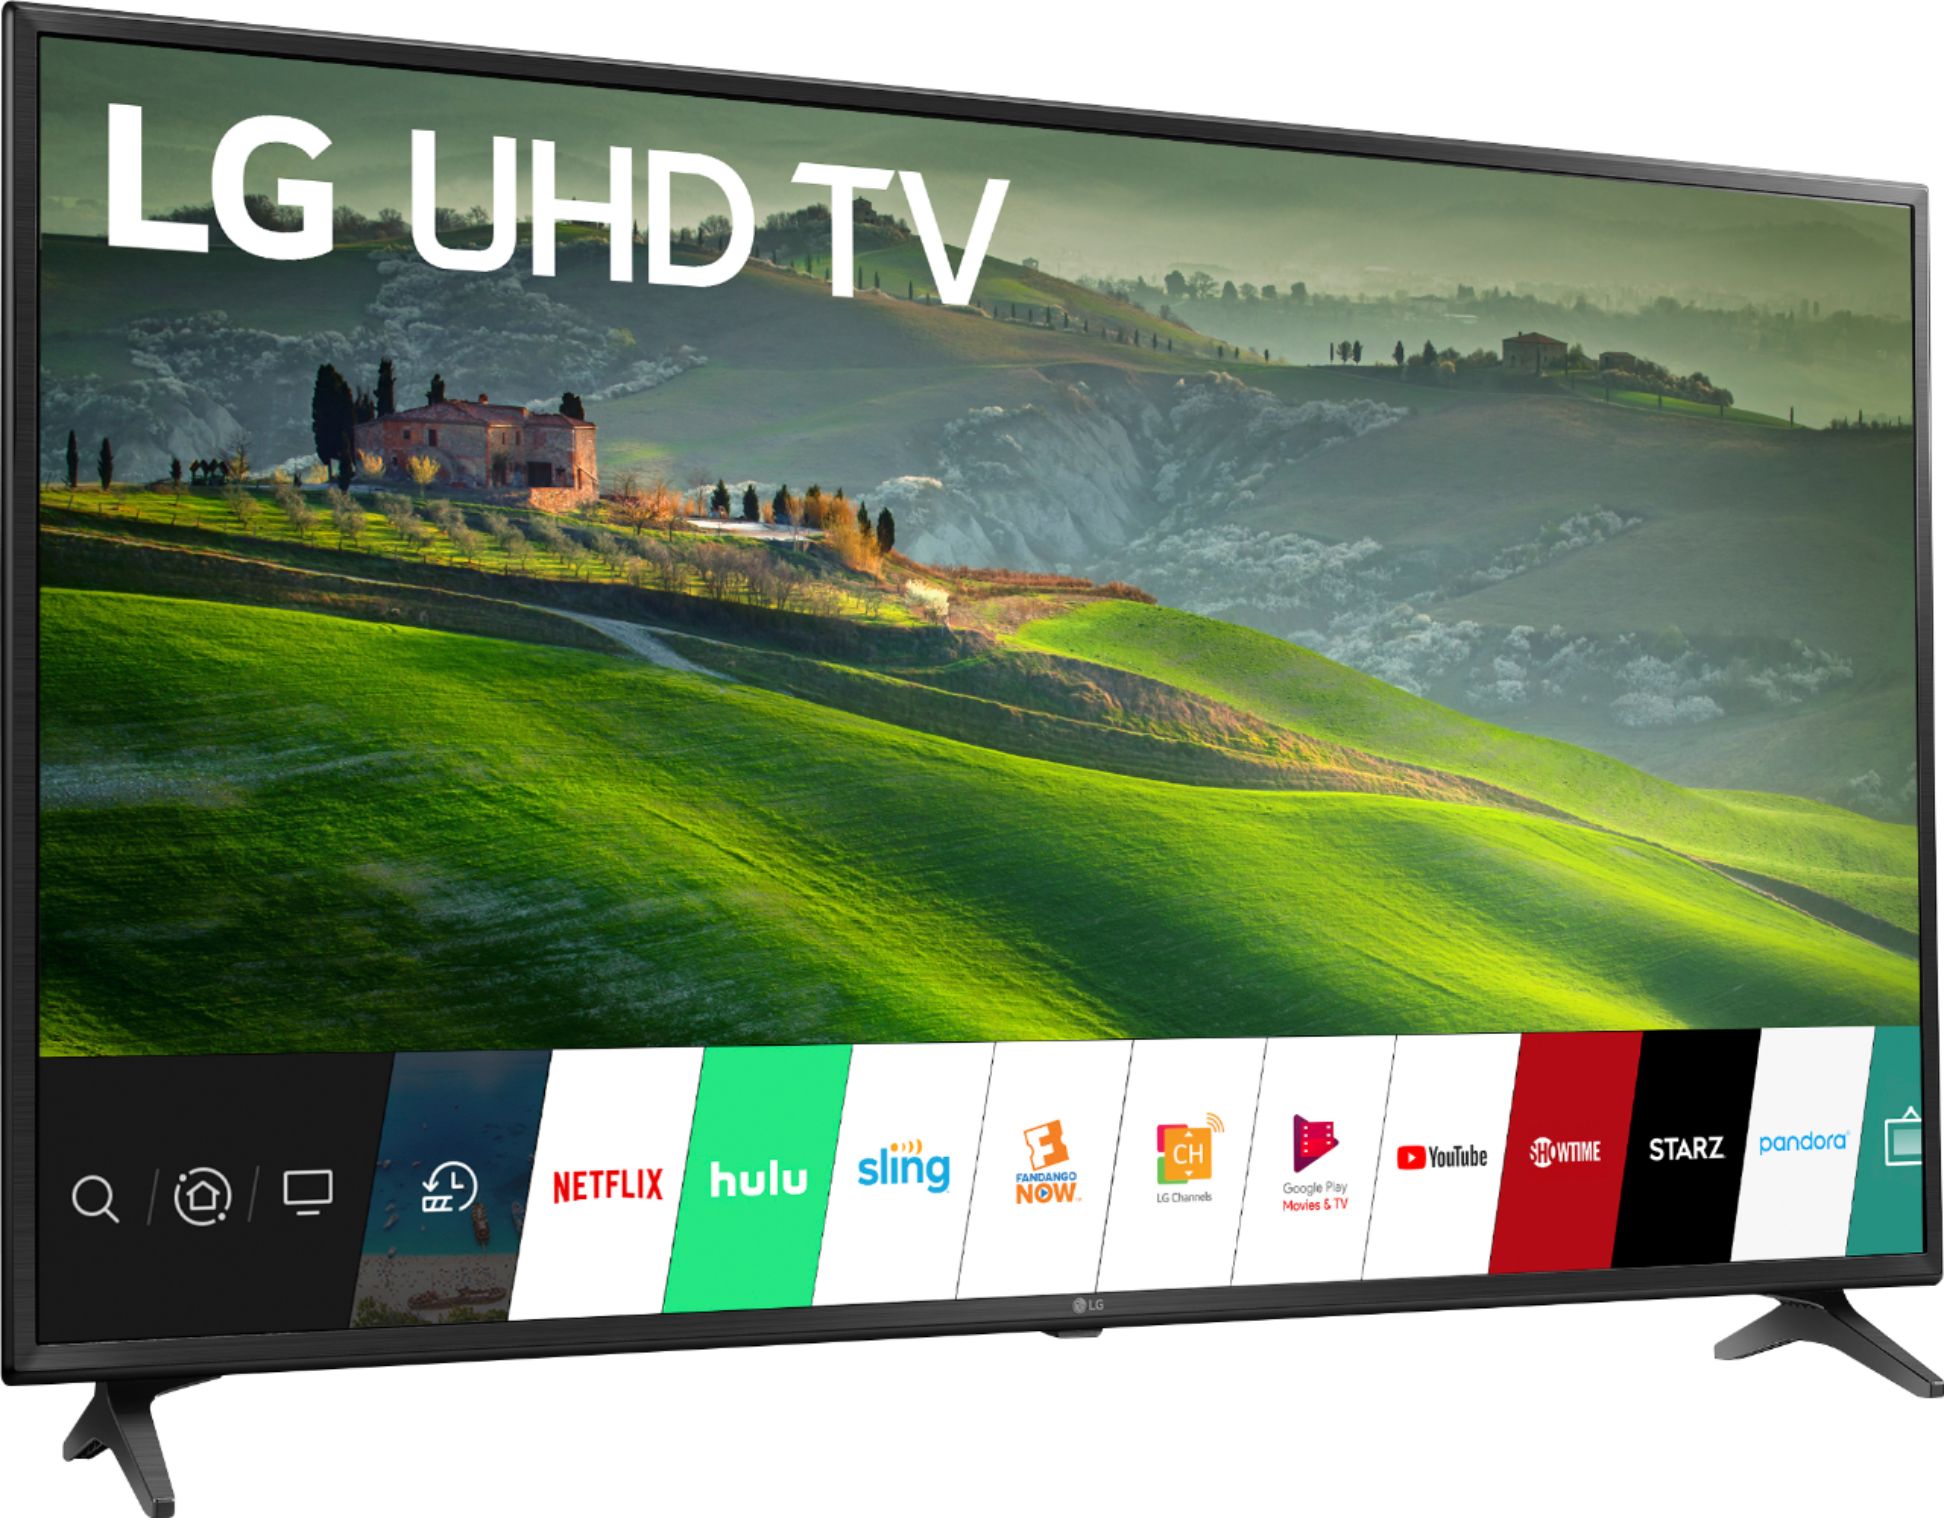 Lg 55 Class Led Um6910puc Series 2160p Smart 4k Uhd Tv With Hdr